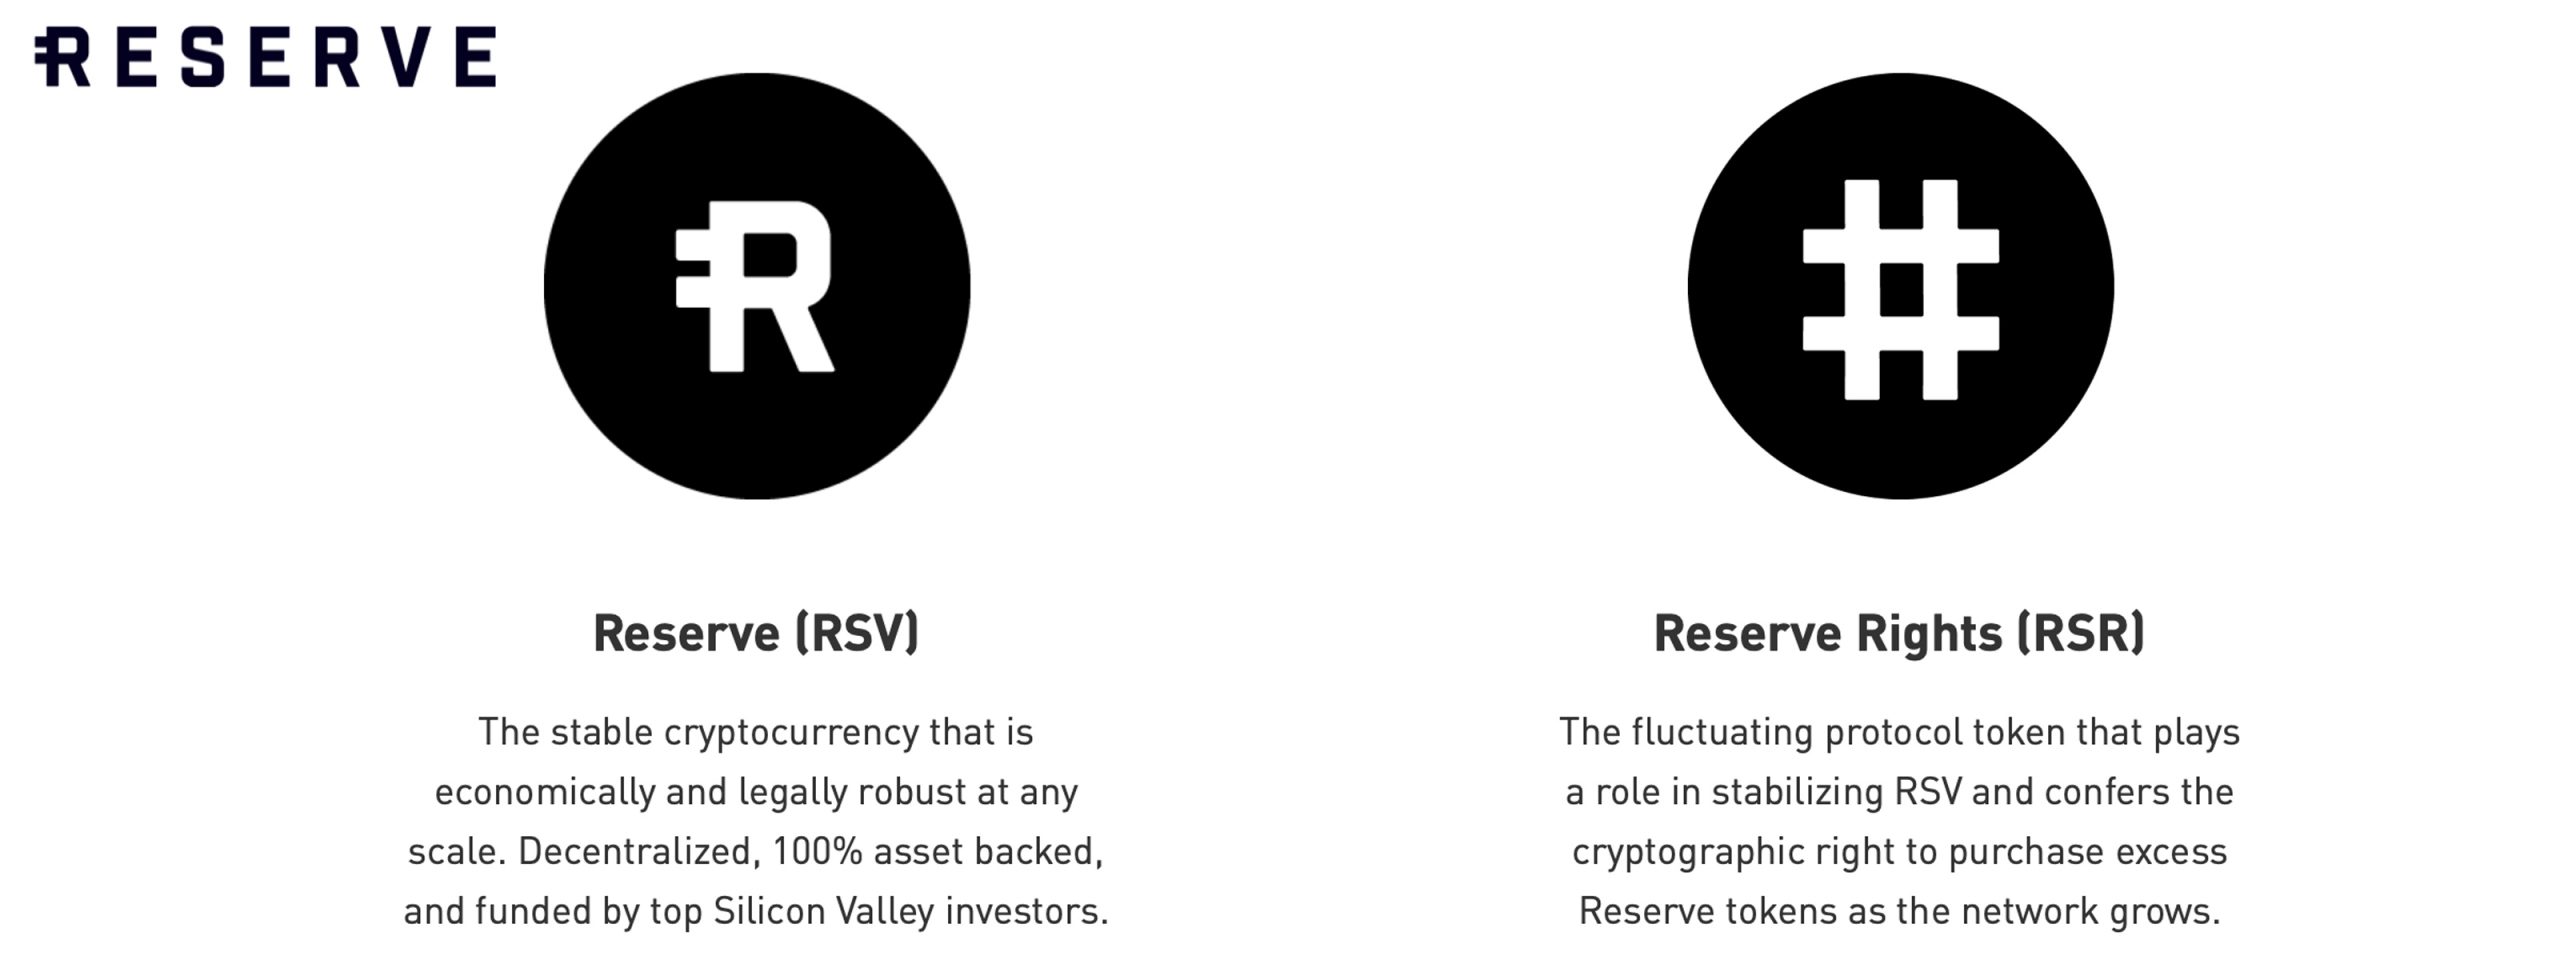 Bitcoin.com Exchange Now Supports Reserve Stablecoin RSV and the Utility Token RSR